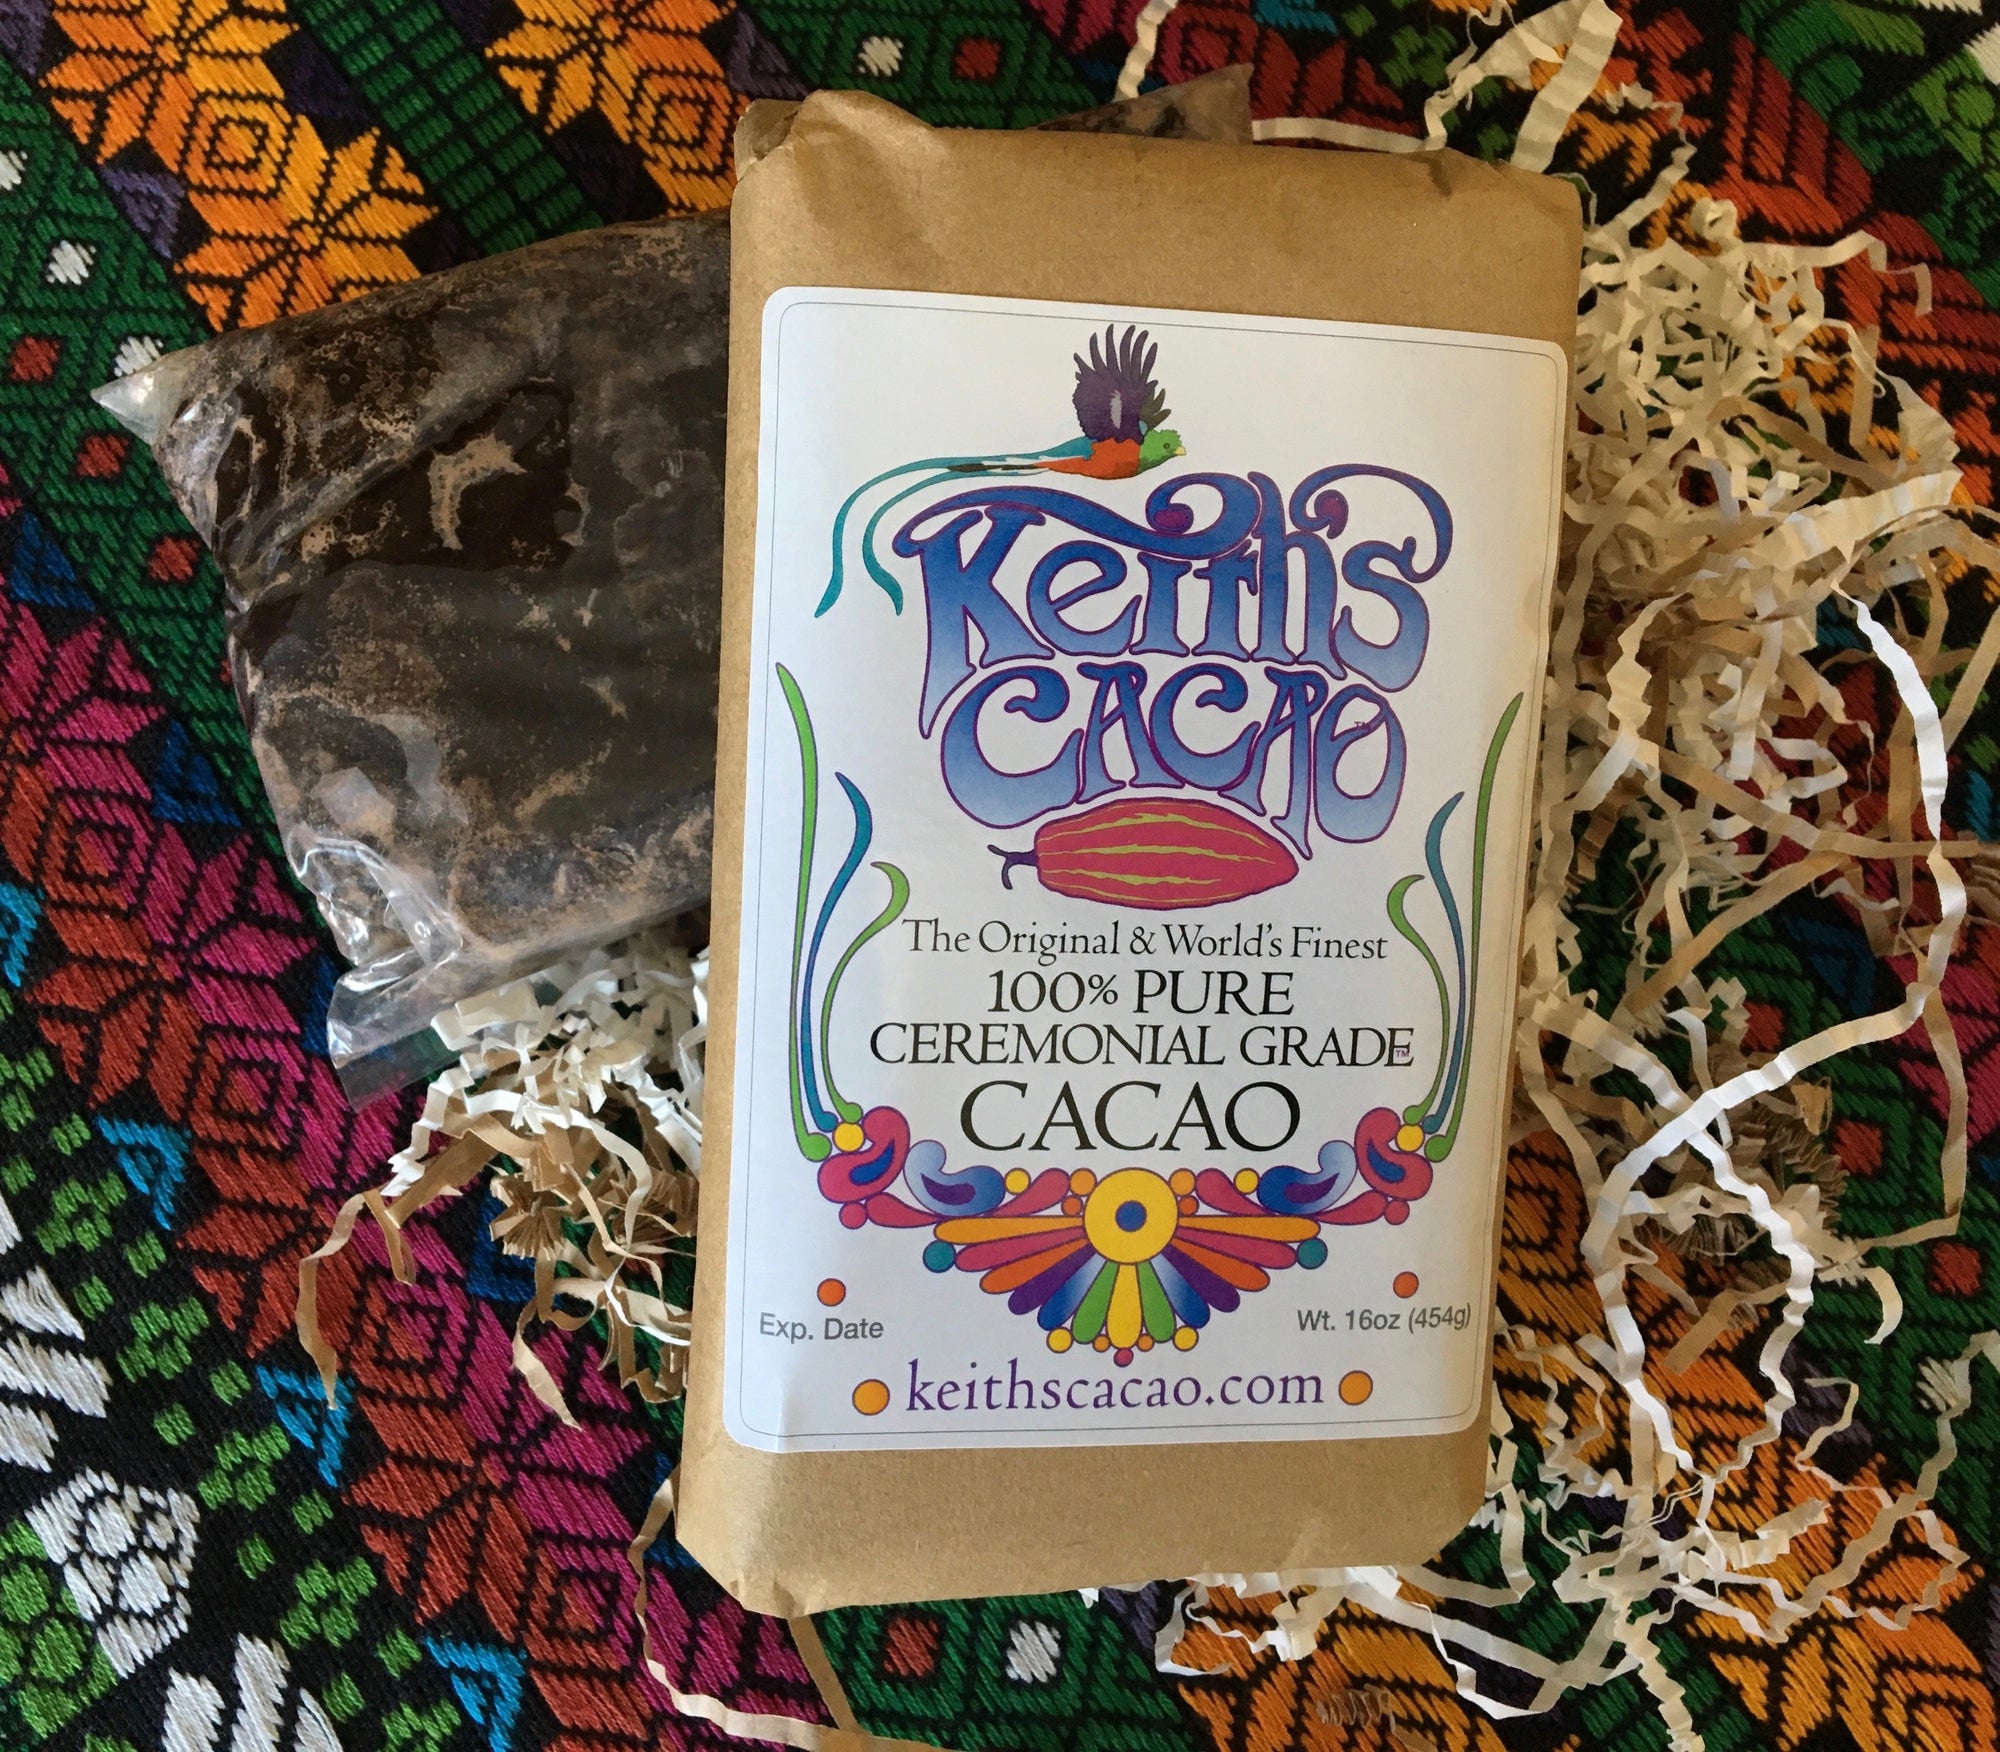 Cacao Paste: The Original & World’s Finest 100% Pure Ceremonial Grade Cacao - Included with Purchase